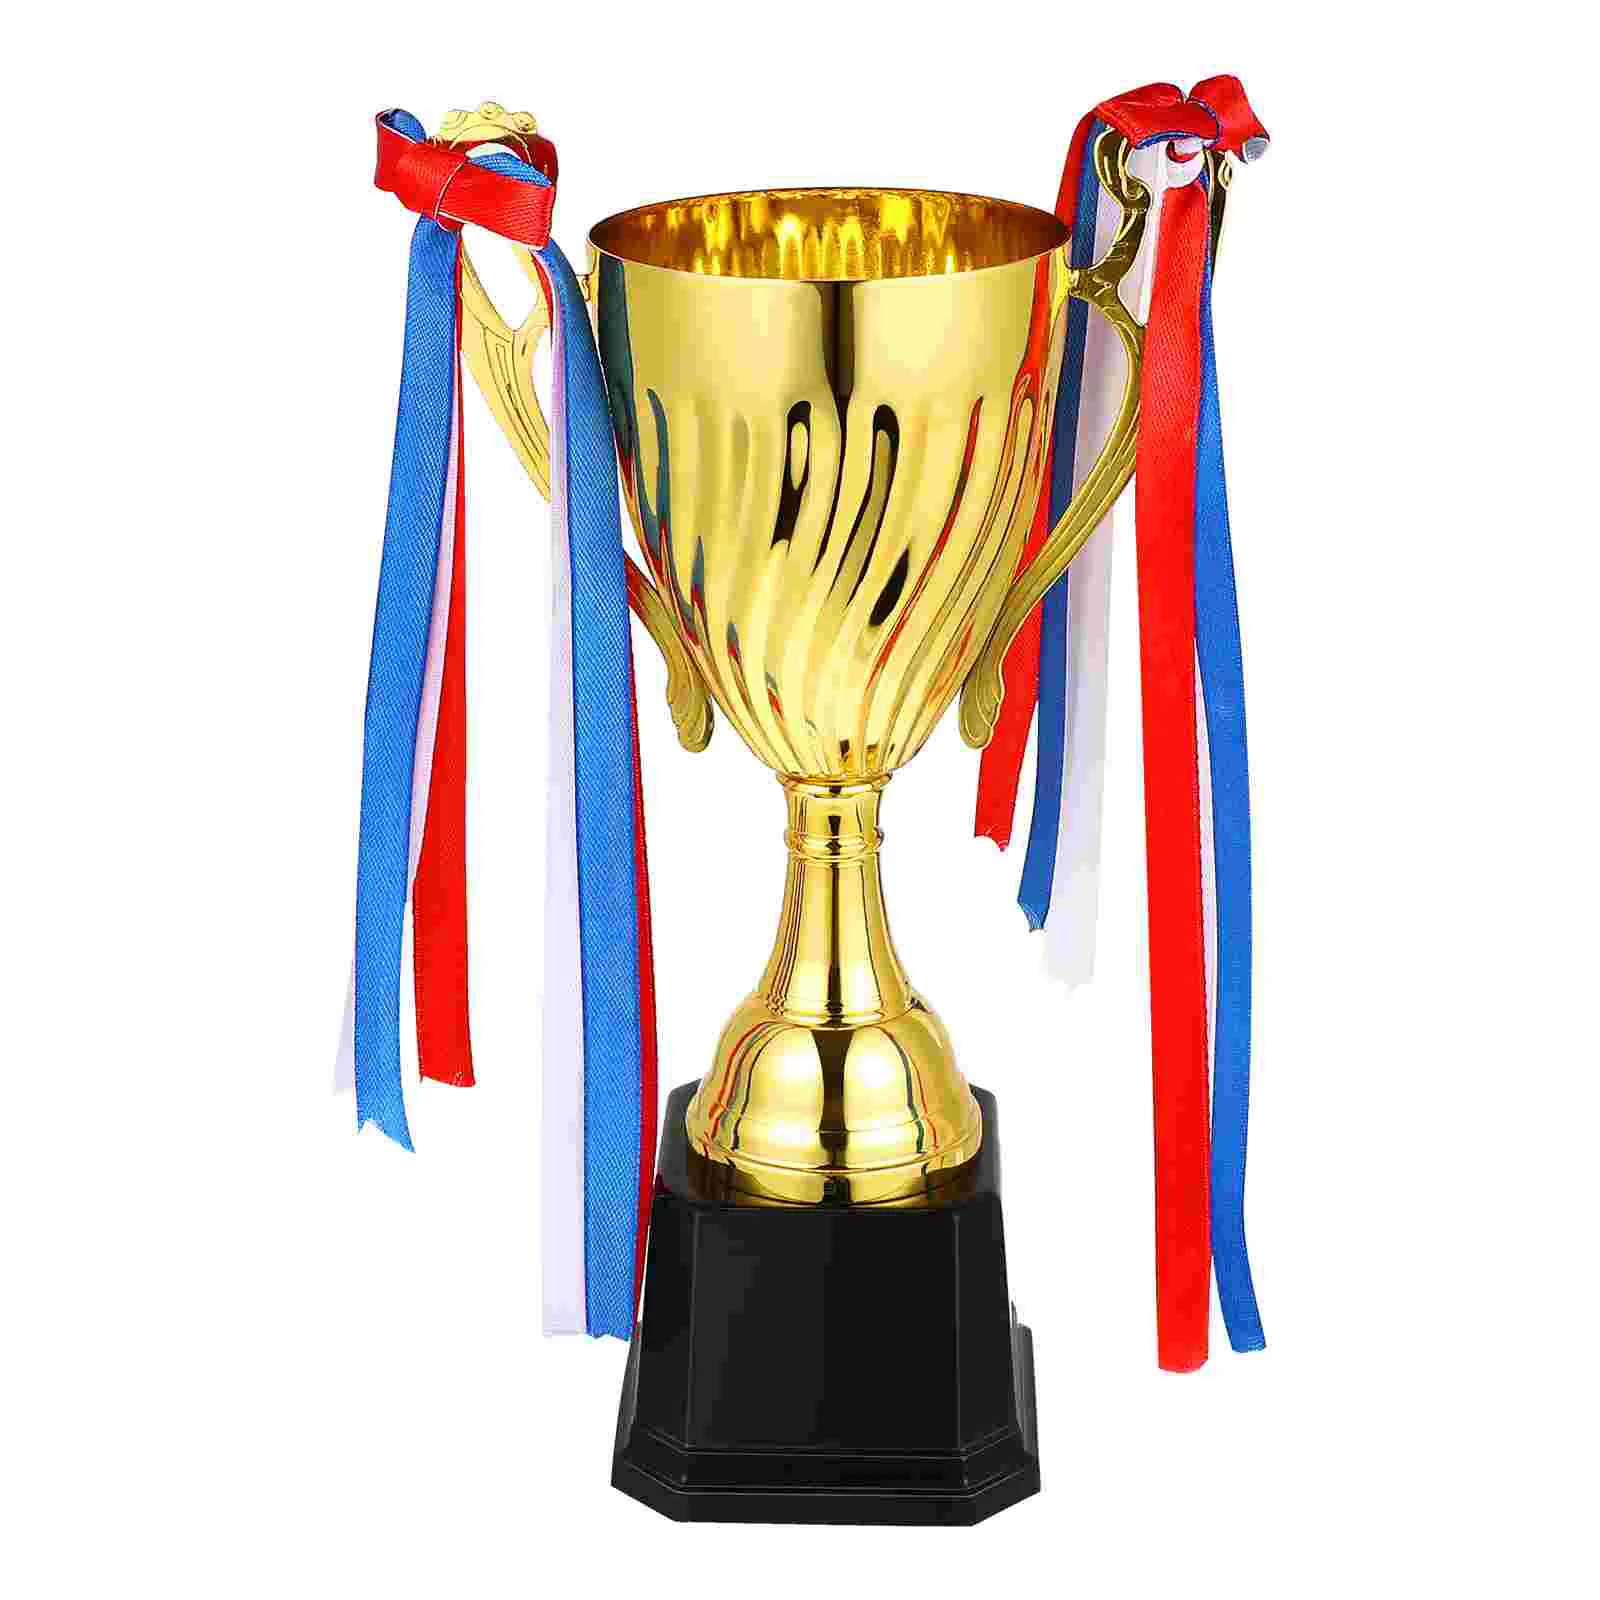 

Trophy Cupaward Trophies Awards Metal Gold Large Winnerplace Big Match First Tournaments Classic Golden Game Halloween Medals